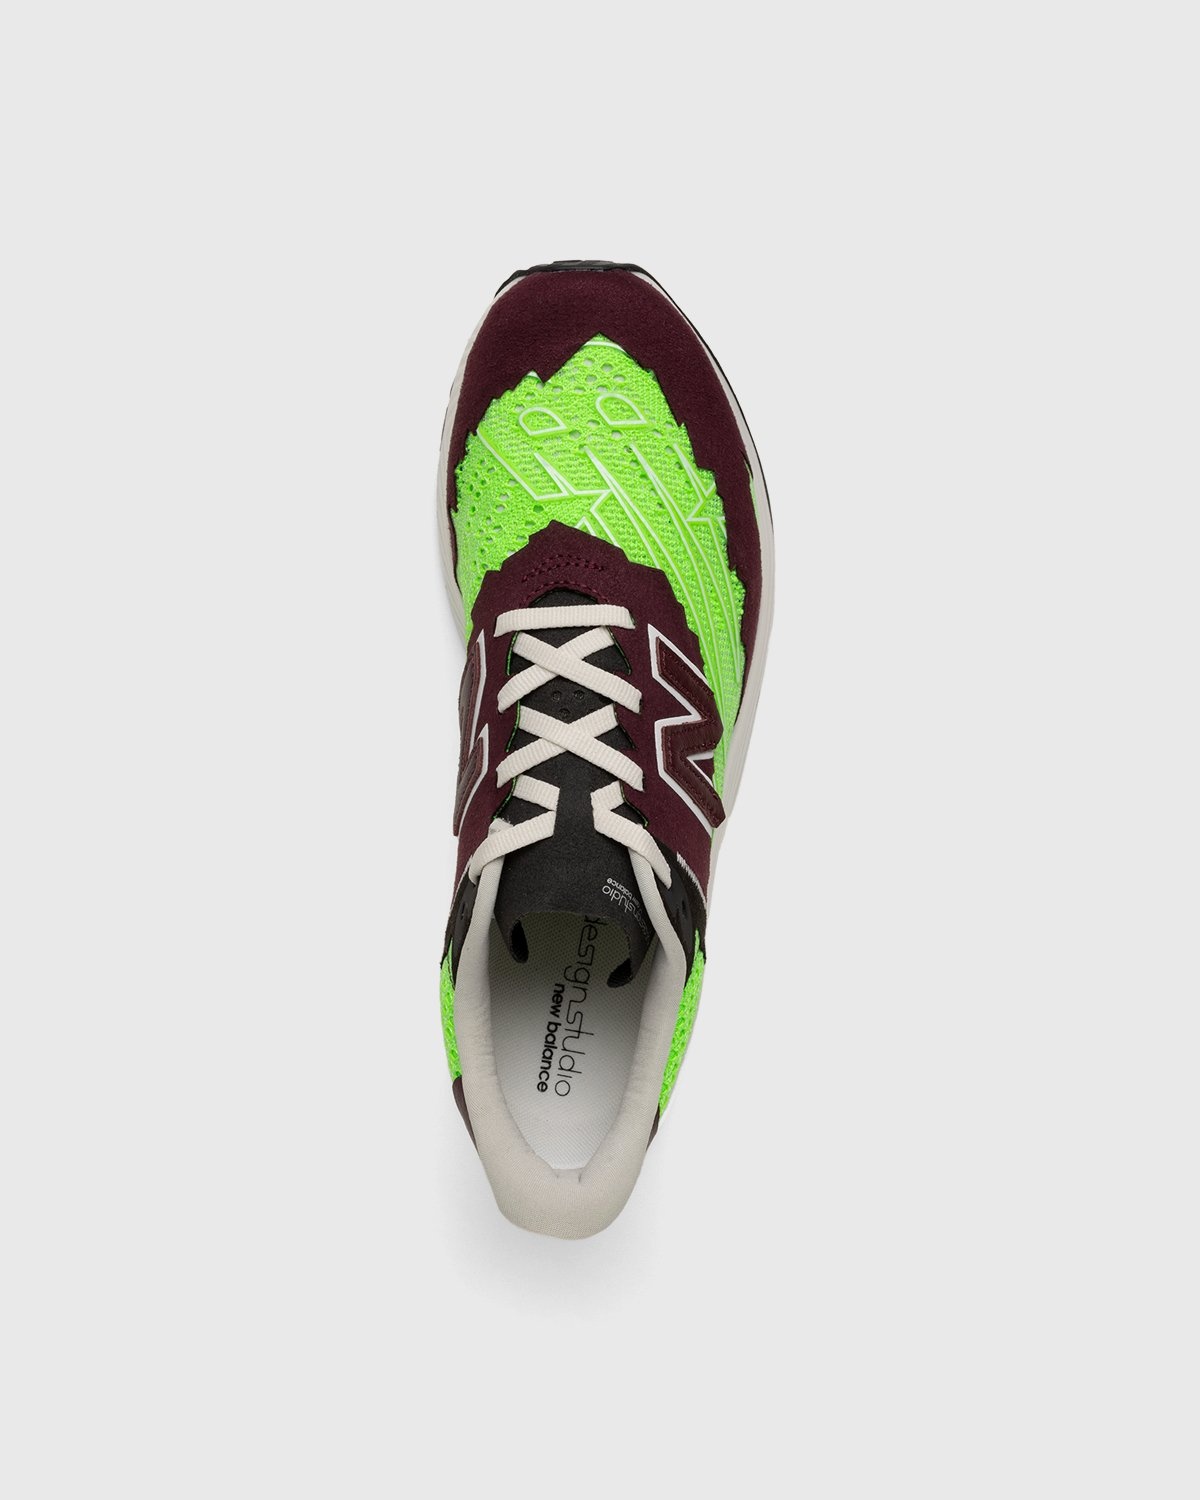 New Balance x Stone Island – FuelCell RC Elite v2 Energy Lime - Low Top Sneakers - Green - Image 5